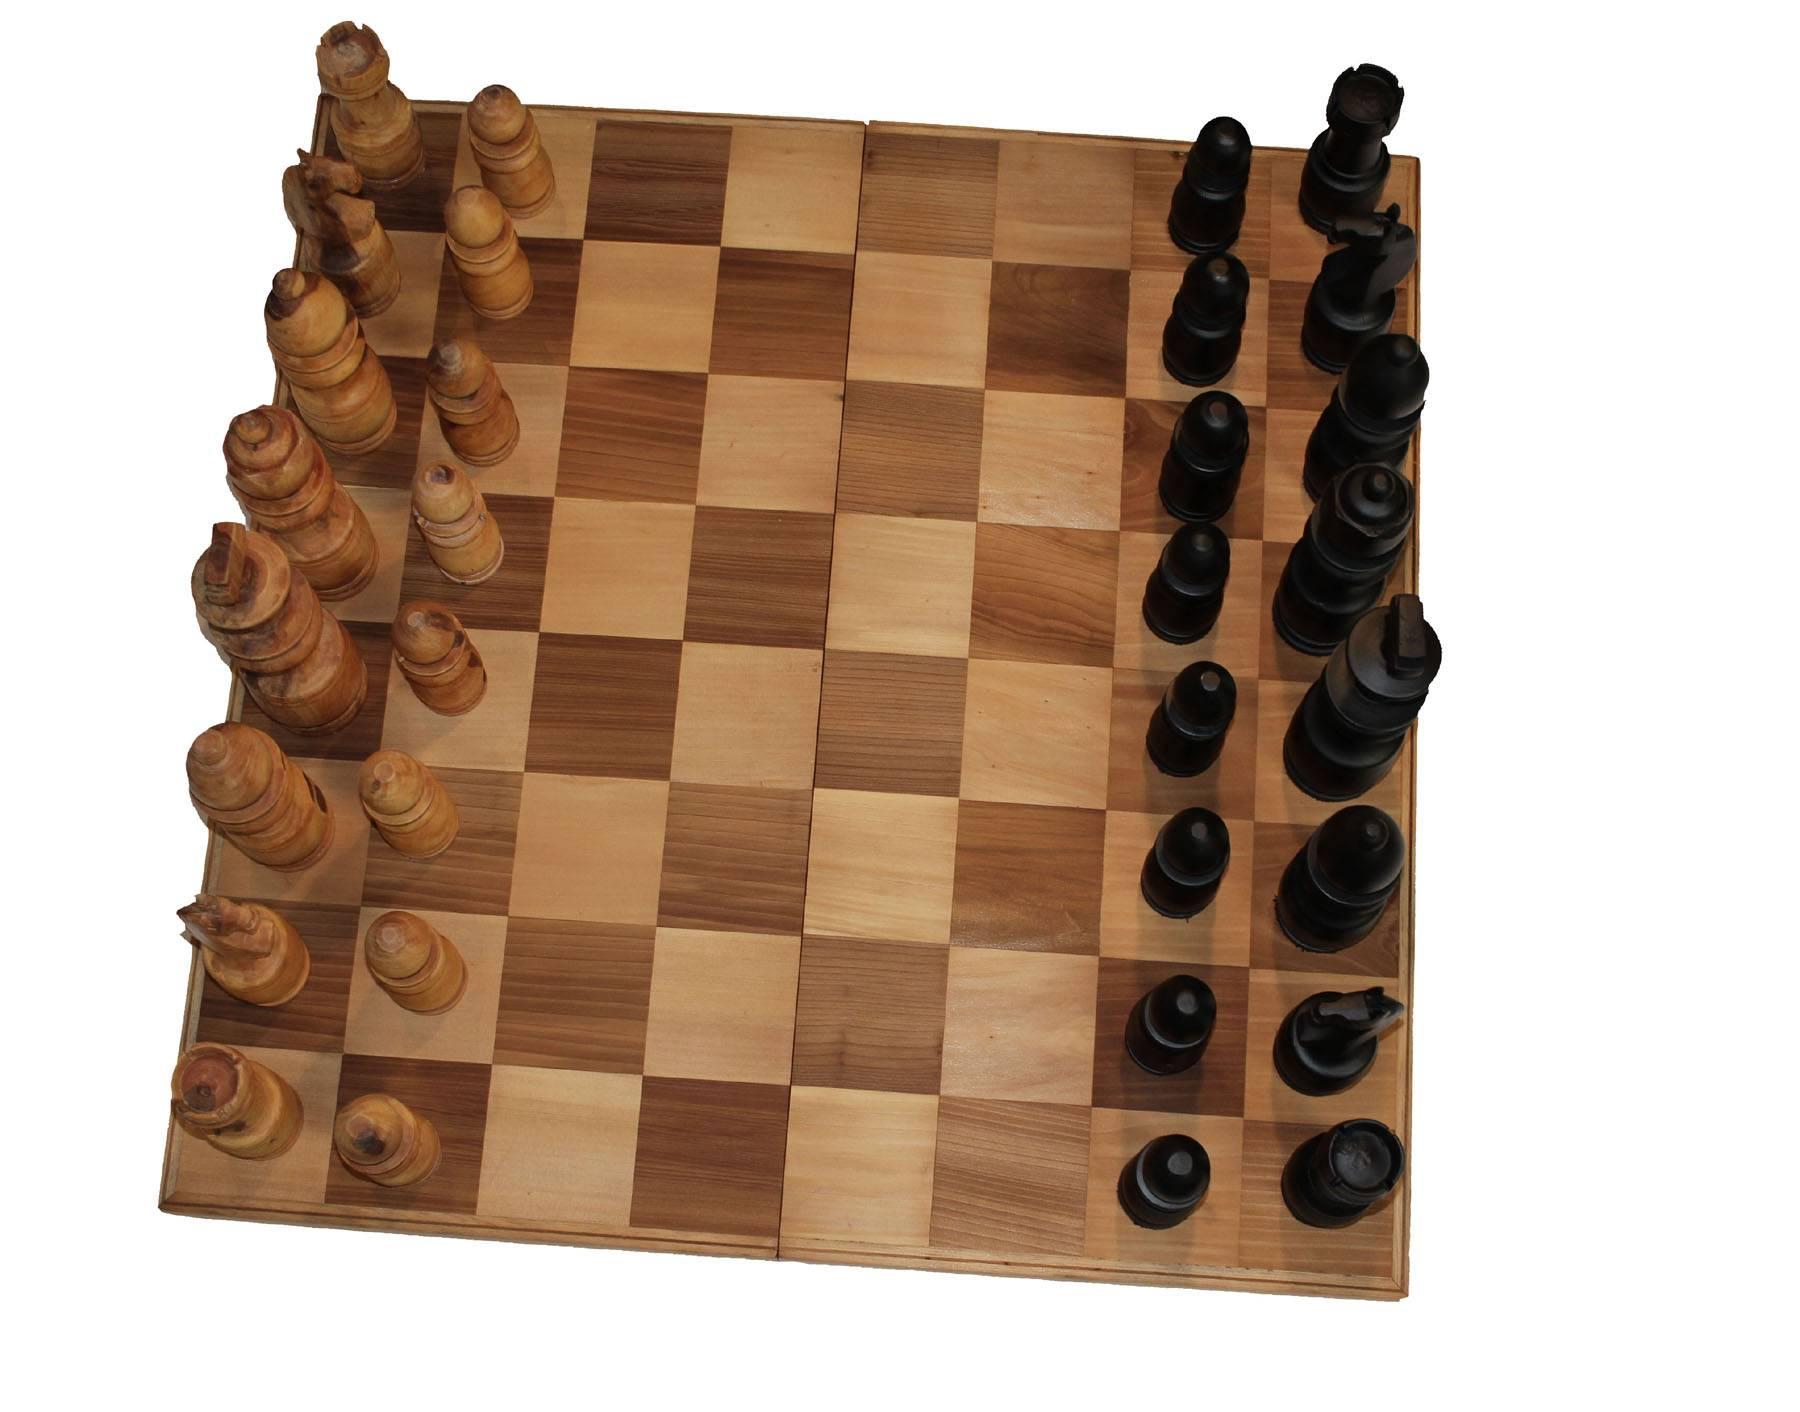 Incredible chess set, kinds are 9.5